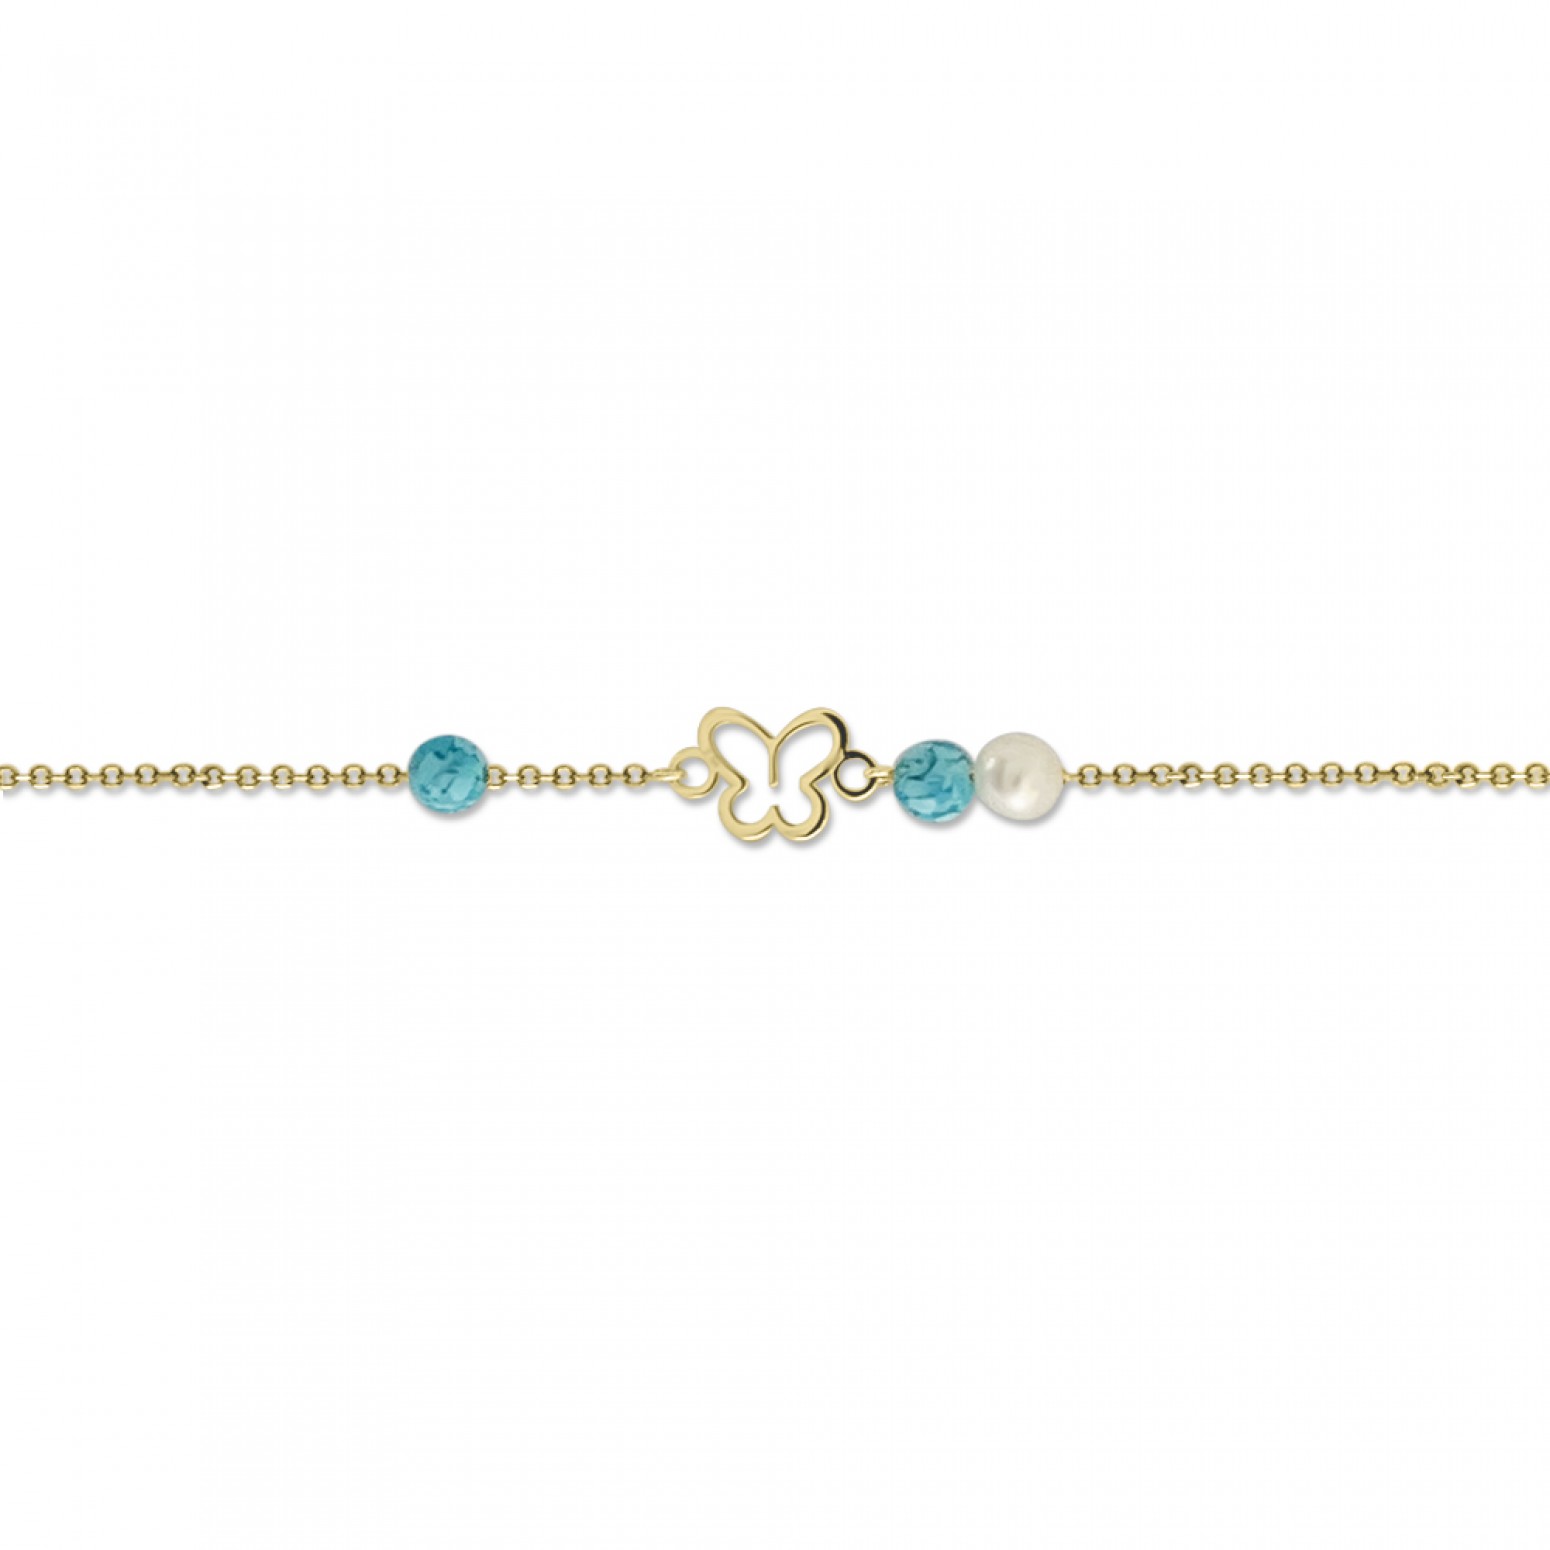 Babies bracelet K14 gold with butterfly, white pearl and turquoise pb0198 BRACELETS Κοσμηματα - chrilia.gr